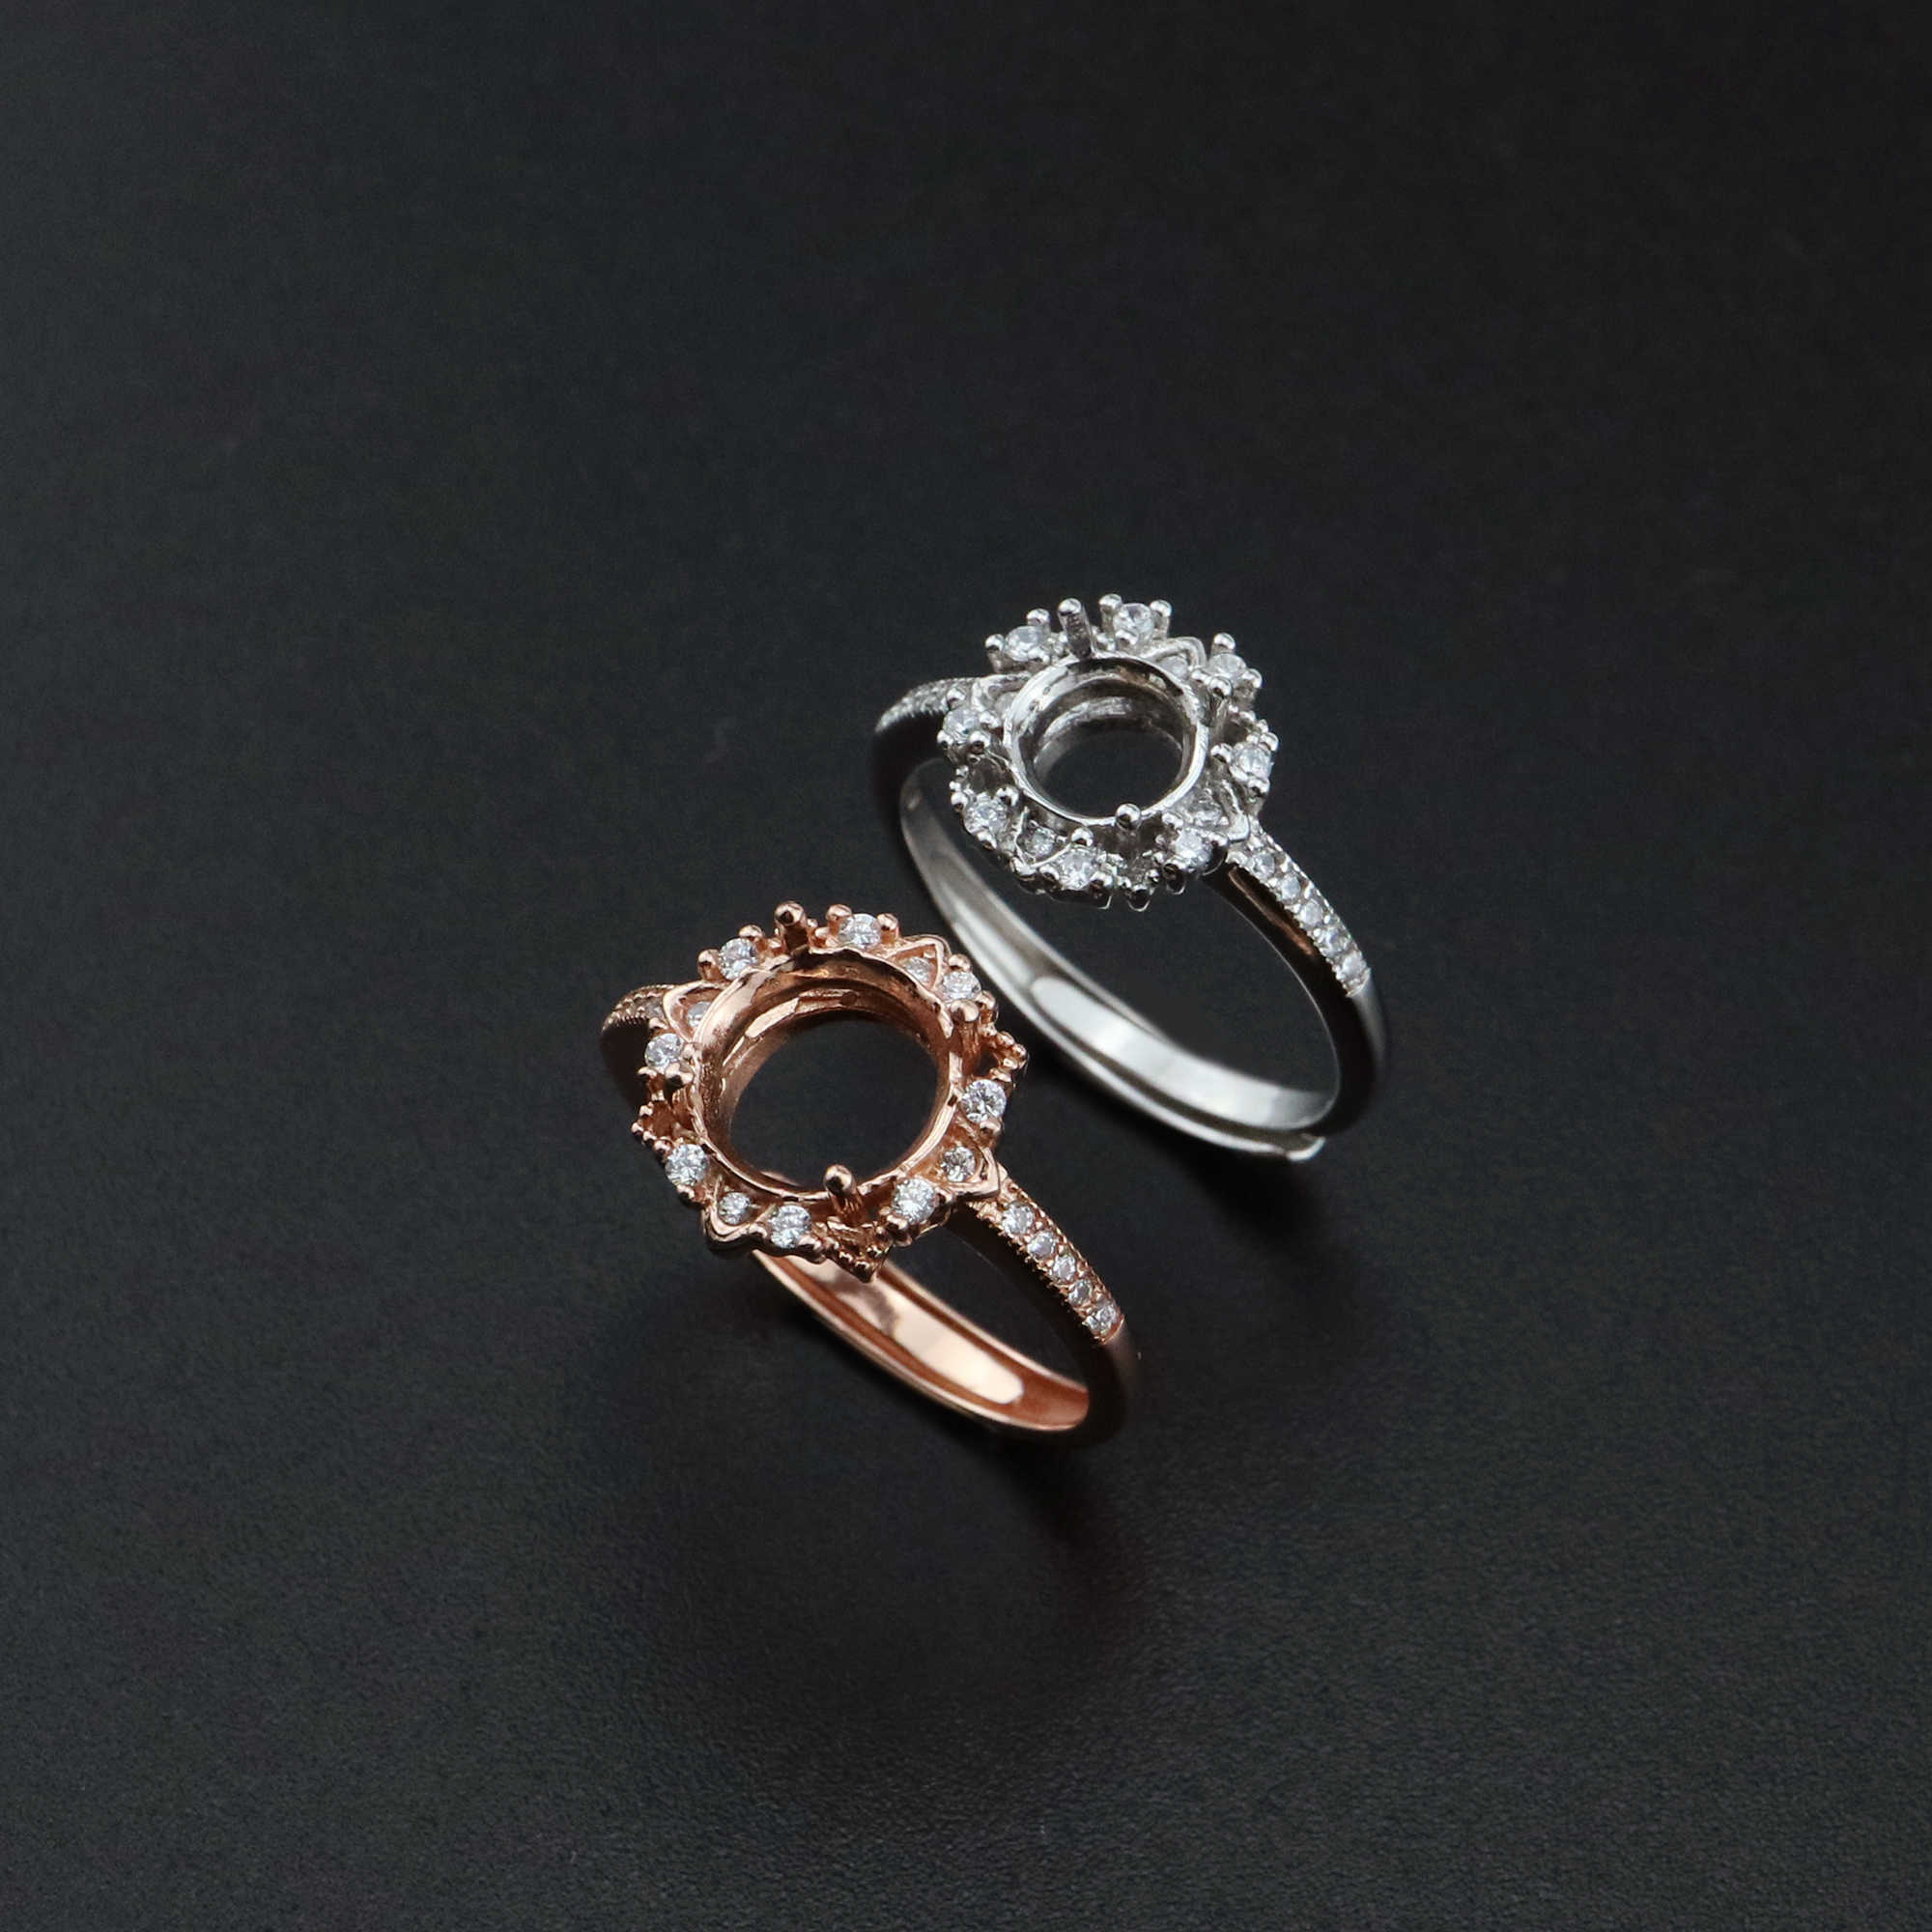 1Pcs 6-8MM Flower Round Prong Bezel Rose Gold Plated Solid 925 Sterling Silver Adjustable Ring Settings for Moissanite Gemstone DIY Supplies 1210051 - Click Image to Close